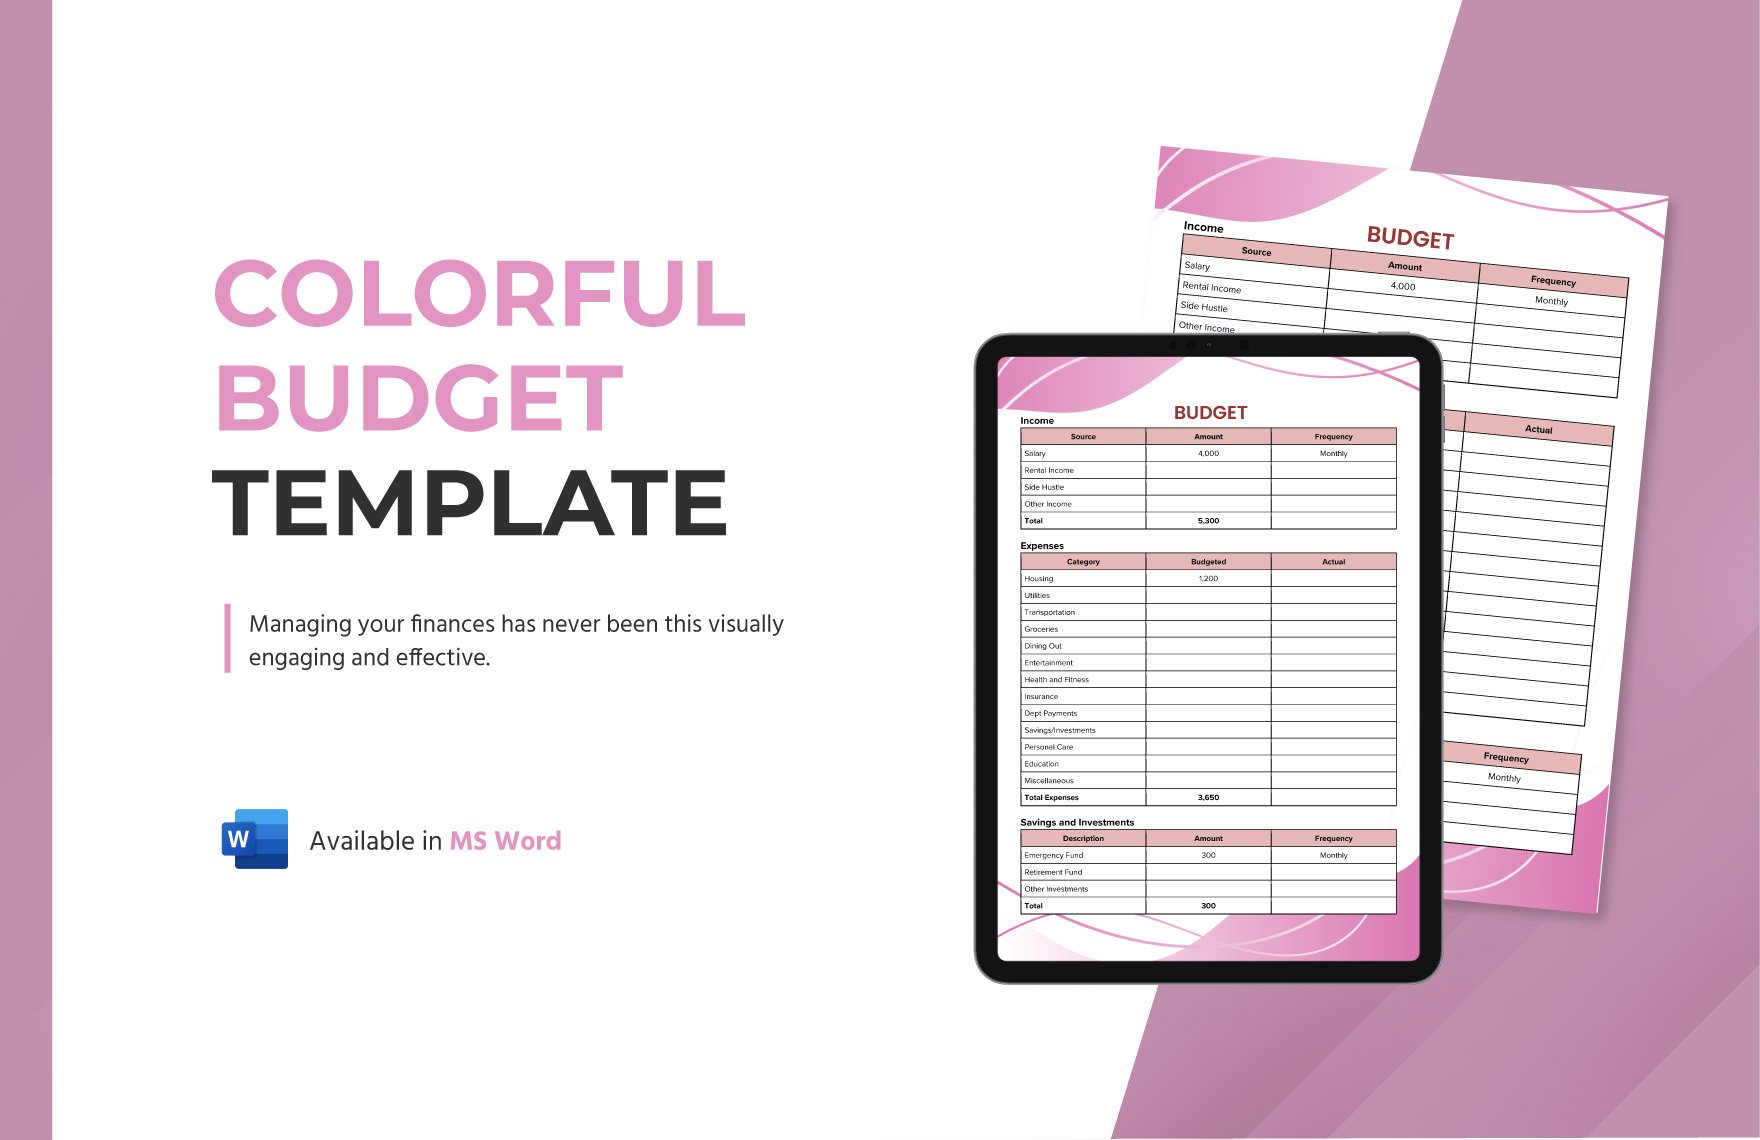 Colorful Budget Template